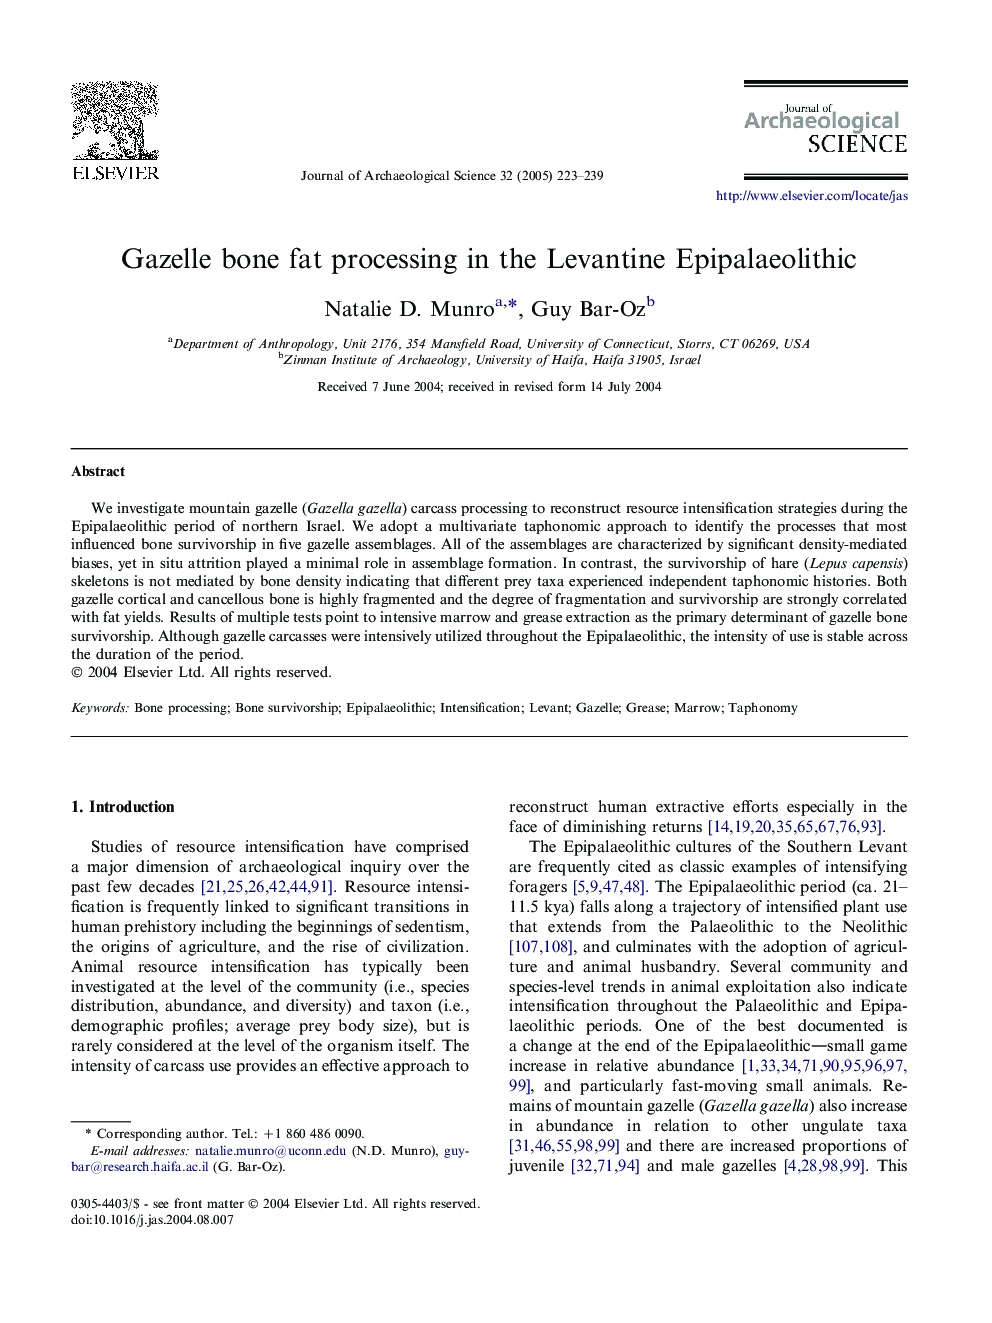 Gazelle bone fat processing in the Levantine Epipalaeolithic